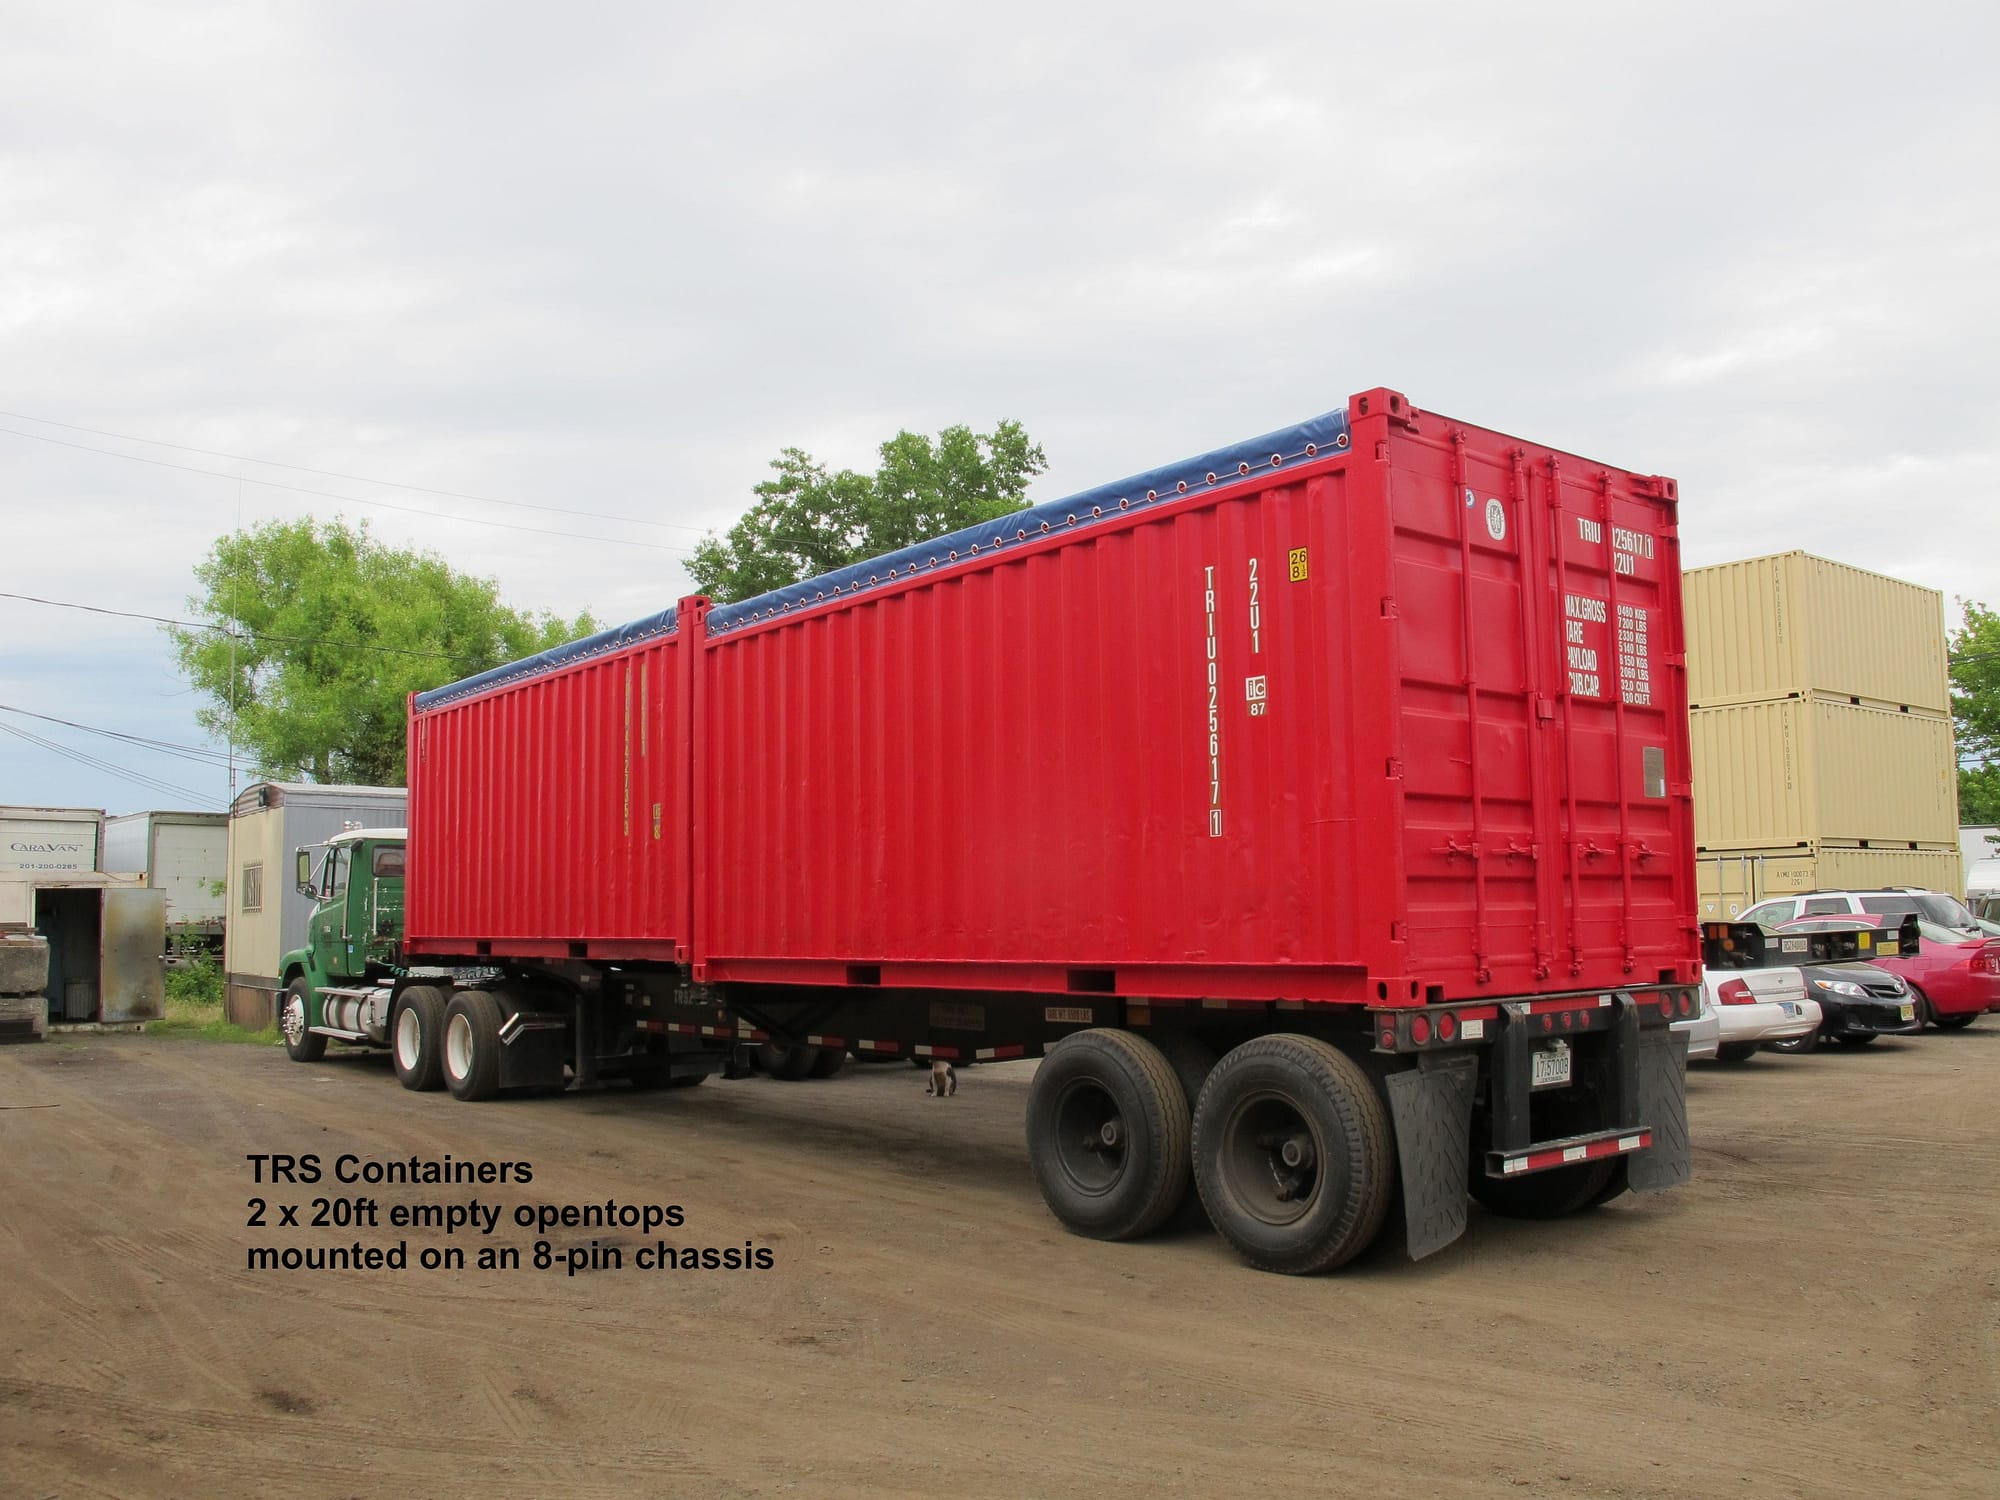 TRS Containers sells rents refurbishes used ISO opentop containers for export or domestic use